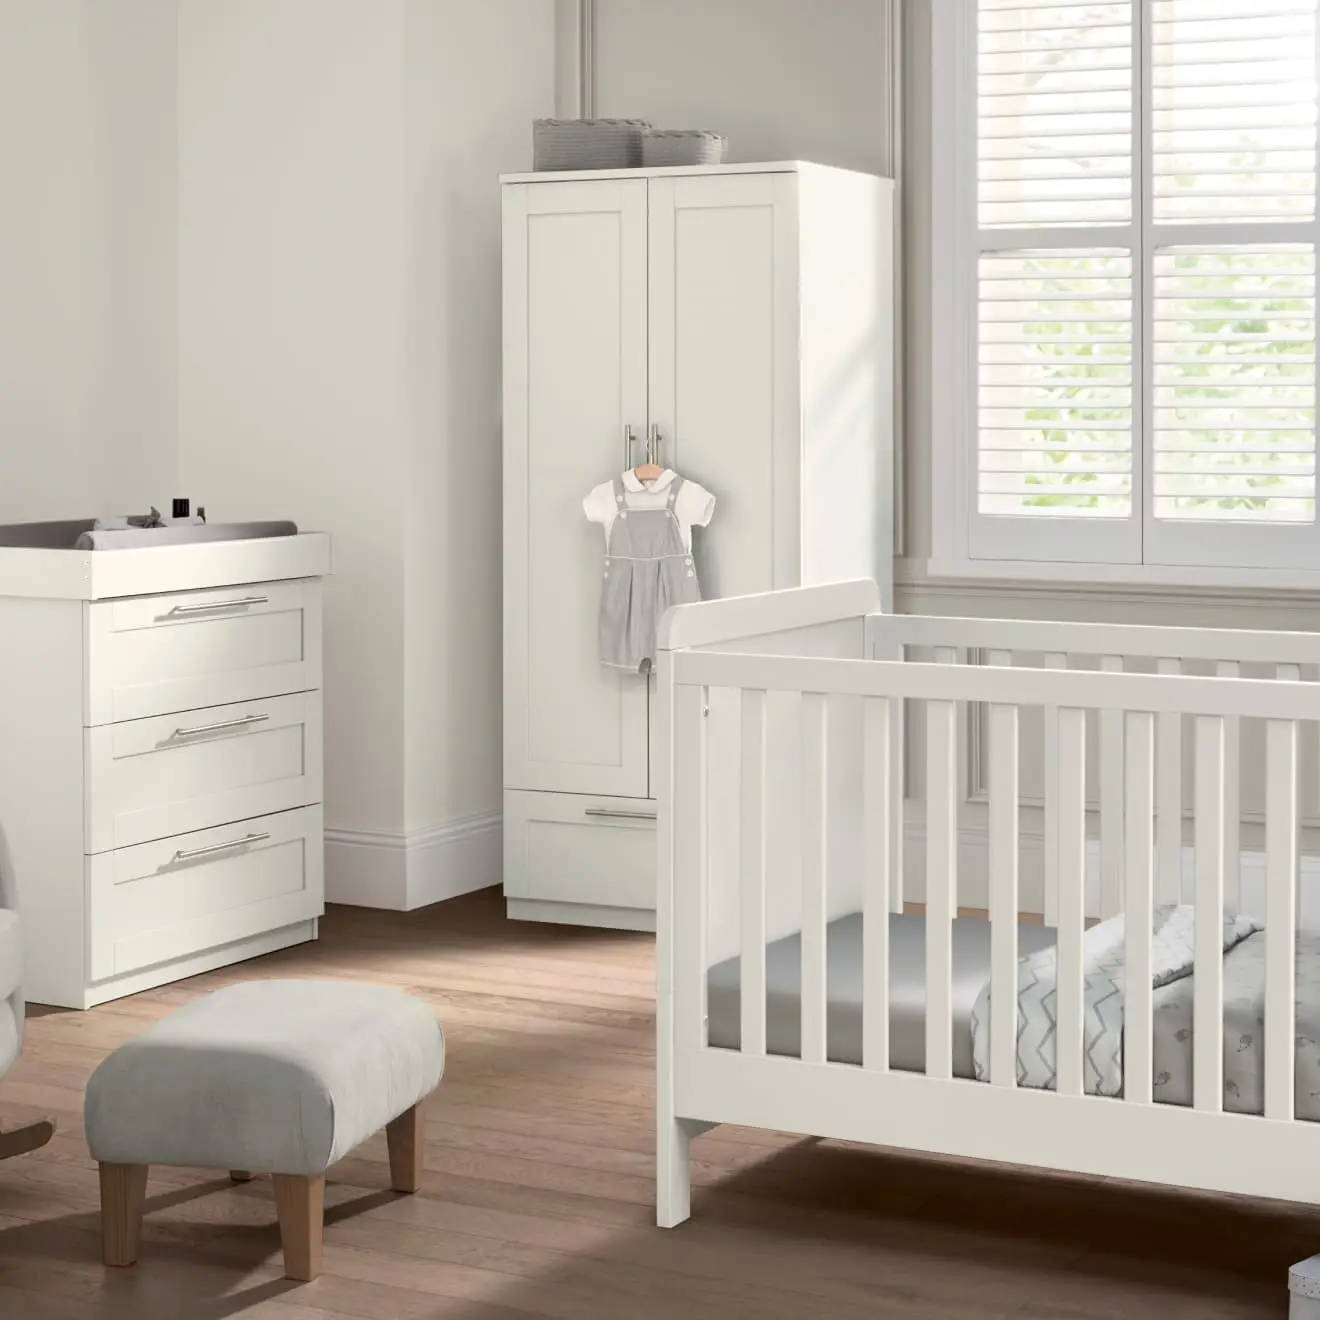 A clean and white nursery